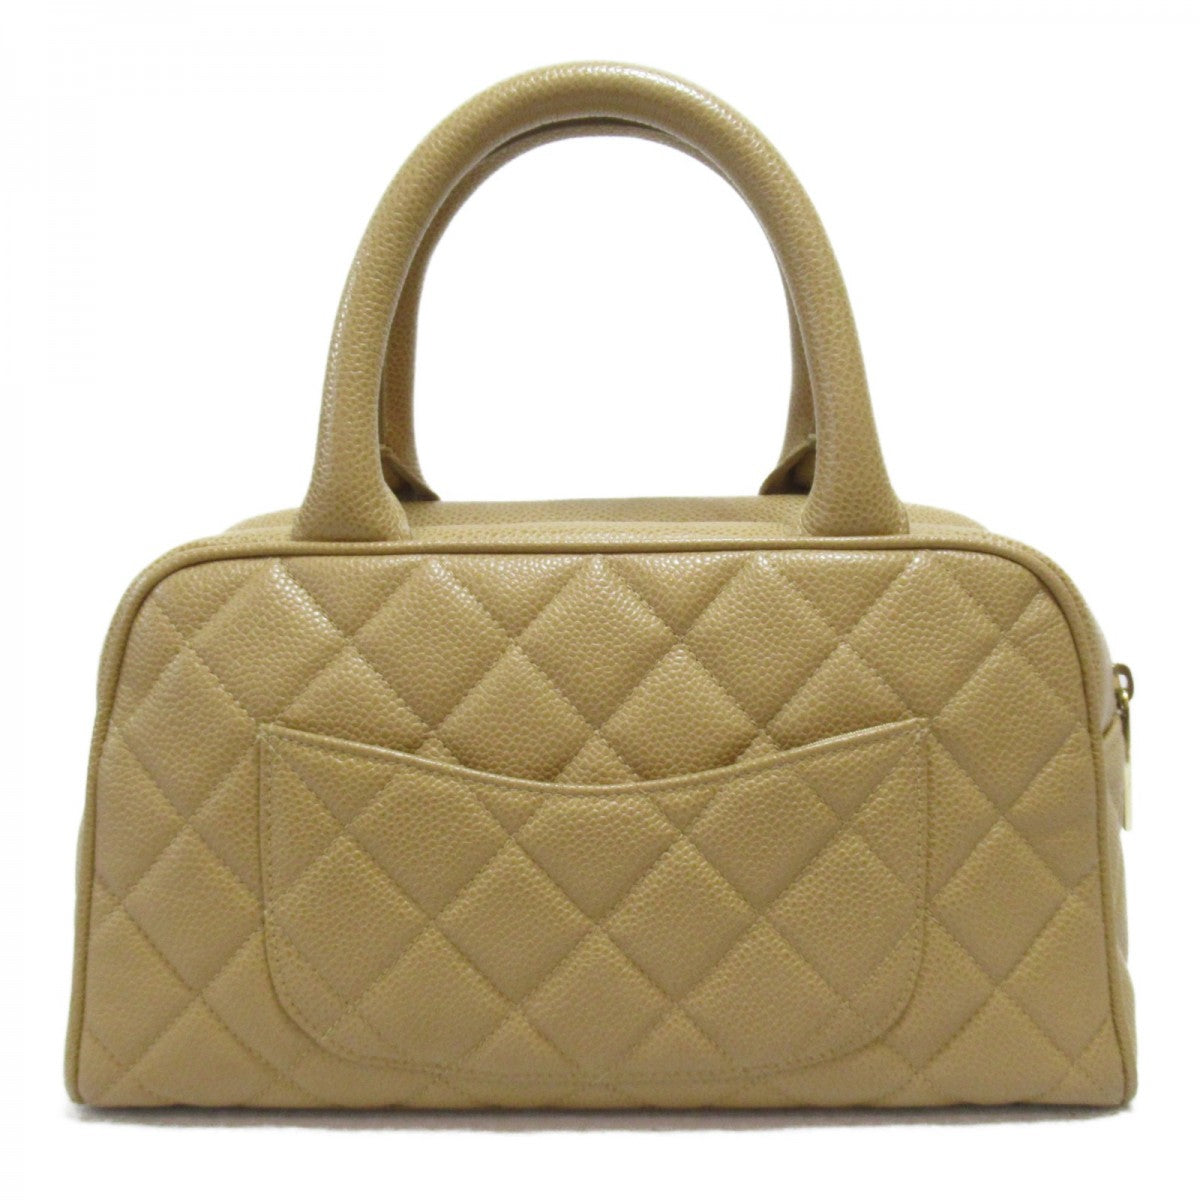 CC Quilted Caviar Boston Bag